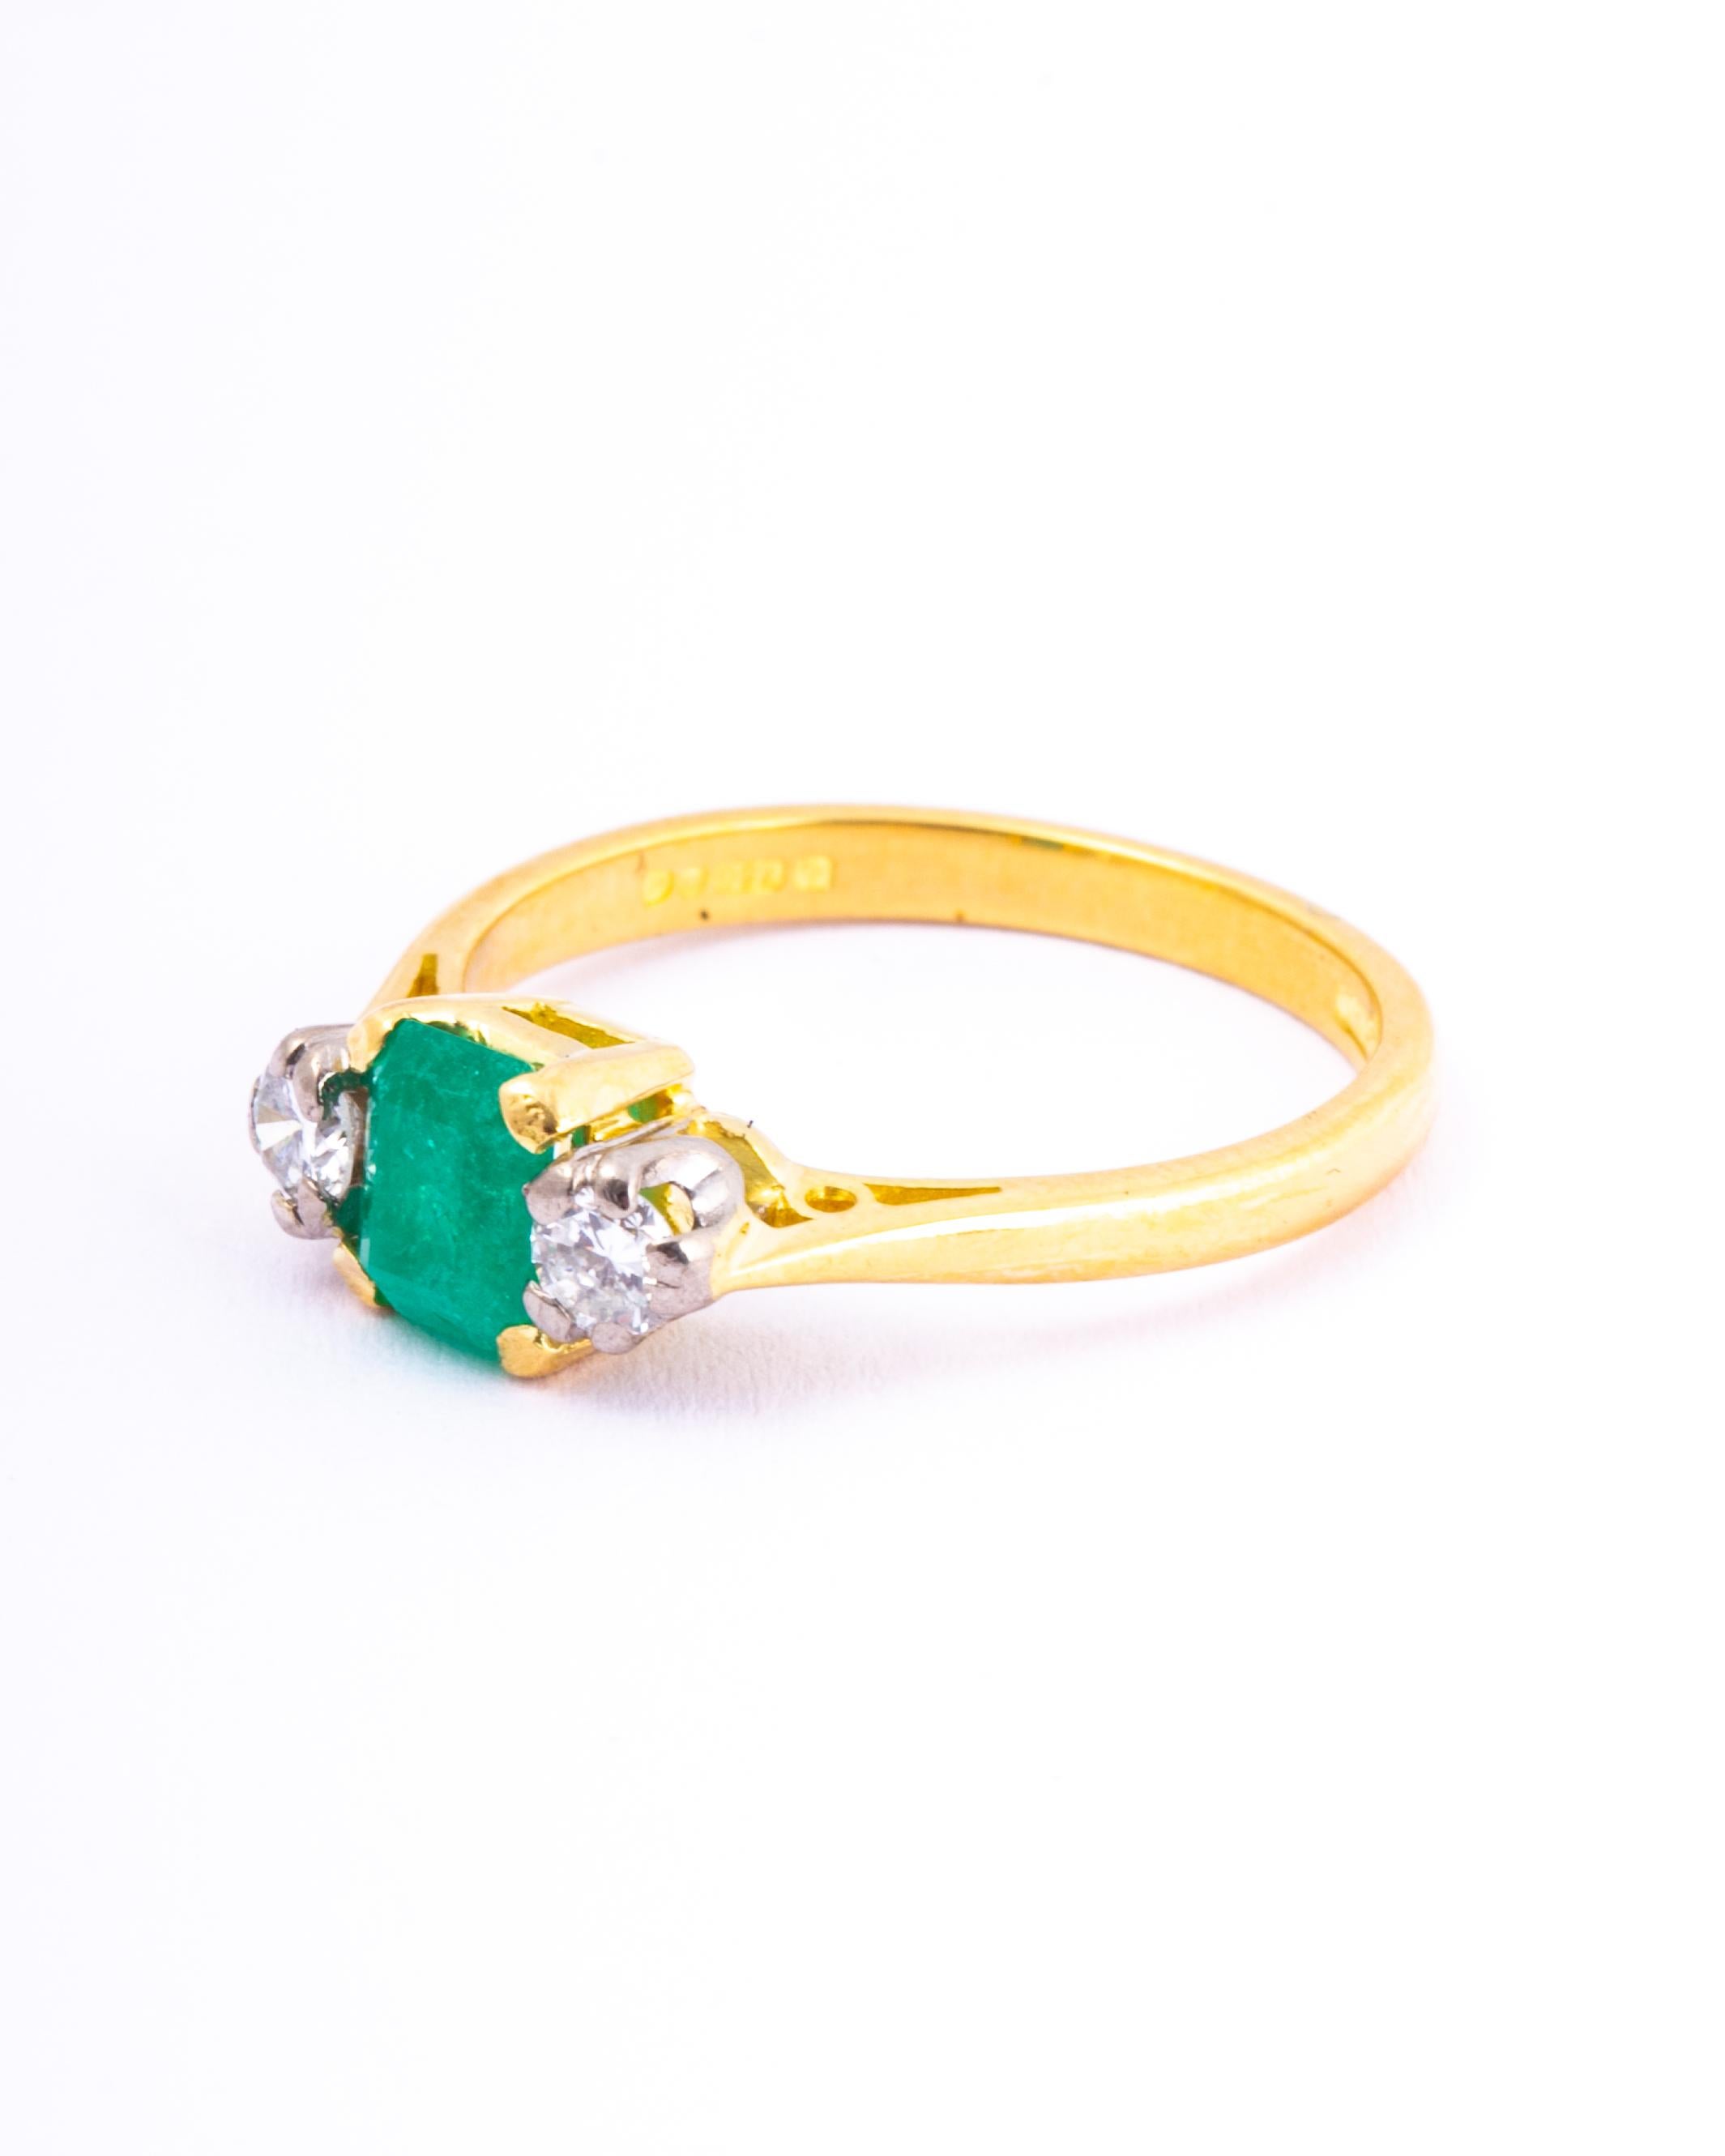 The central emerald is so bright and beautiful and measures 50pts. Sat either side it are two bright shimmering old European cut diamonds each measuring 20pts. The ring is modelled in 18ct gold.

Ring Size: L or 5 3/4 
Width: 5.5mm
Height Off